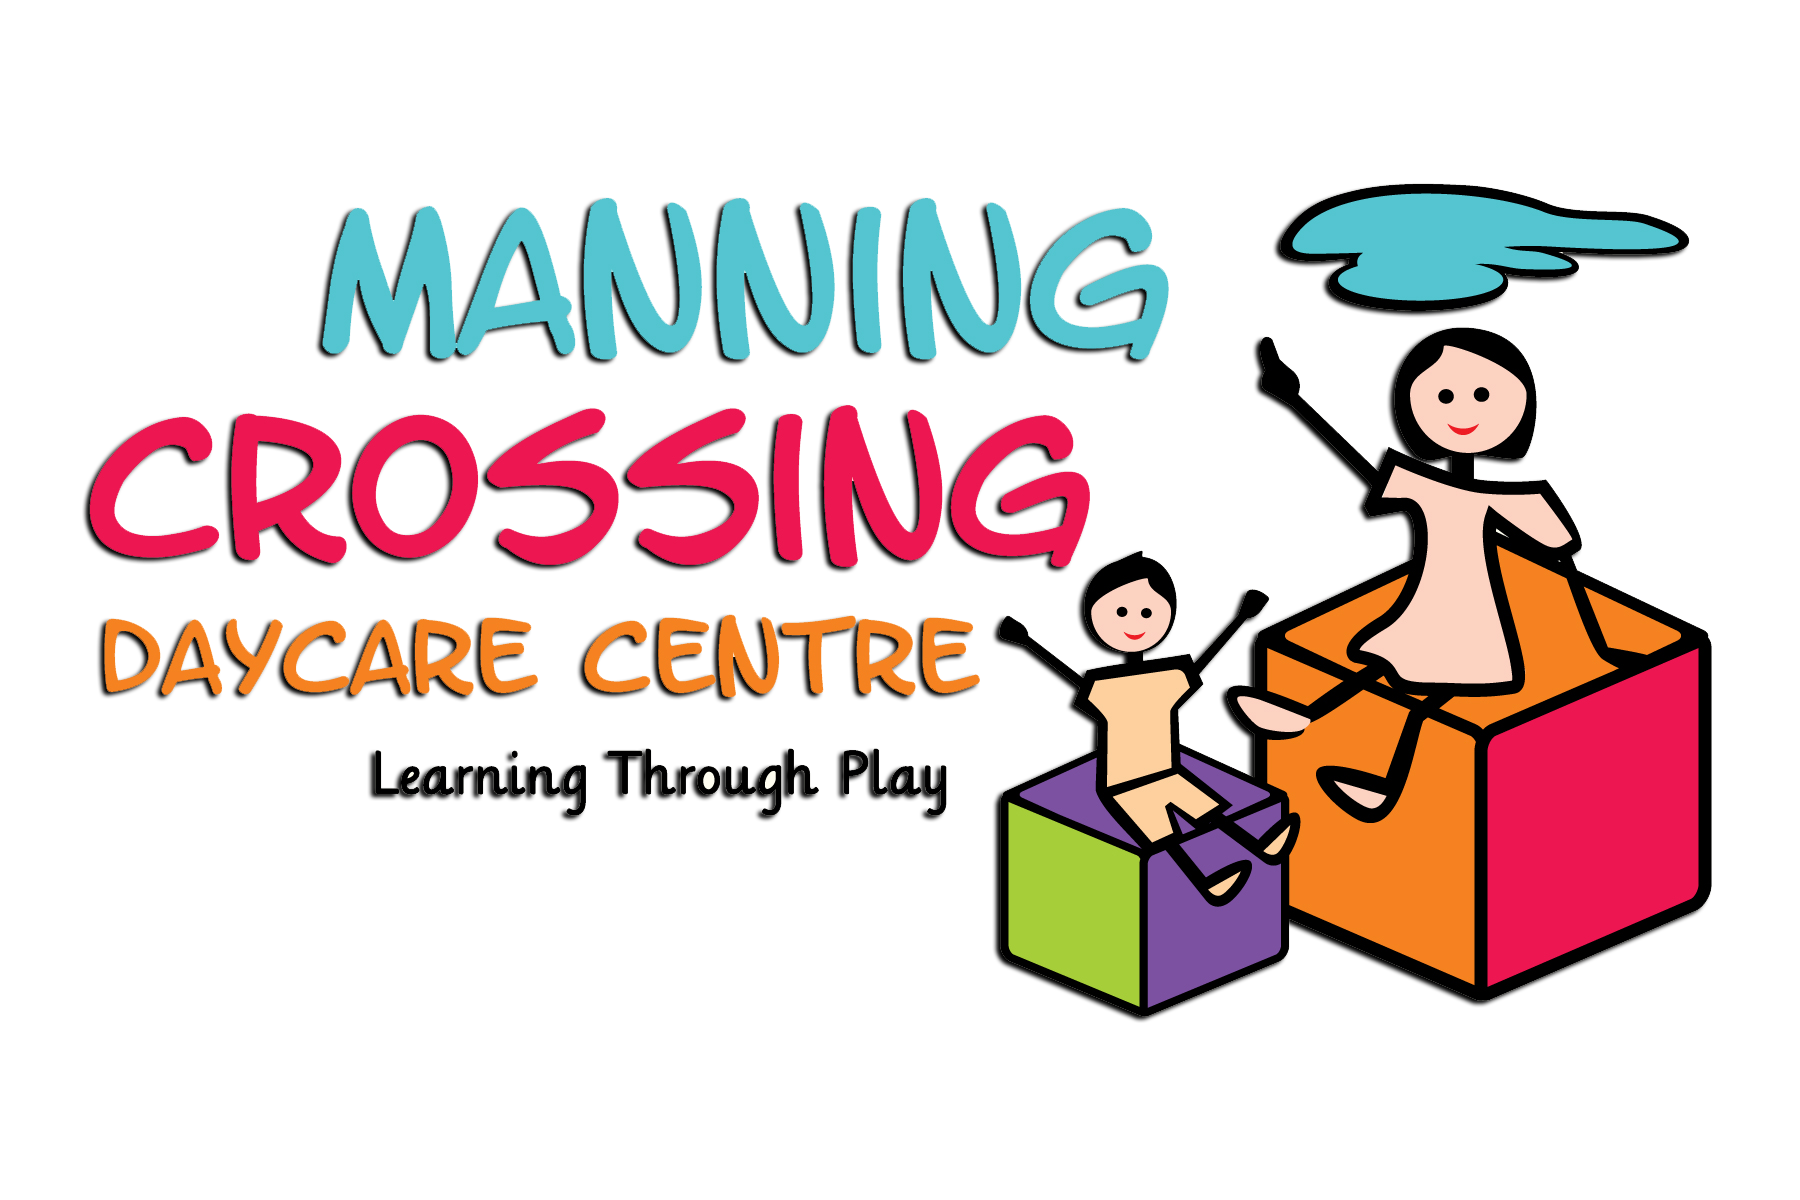 Manning crossing centre . Daycare clipart trust